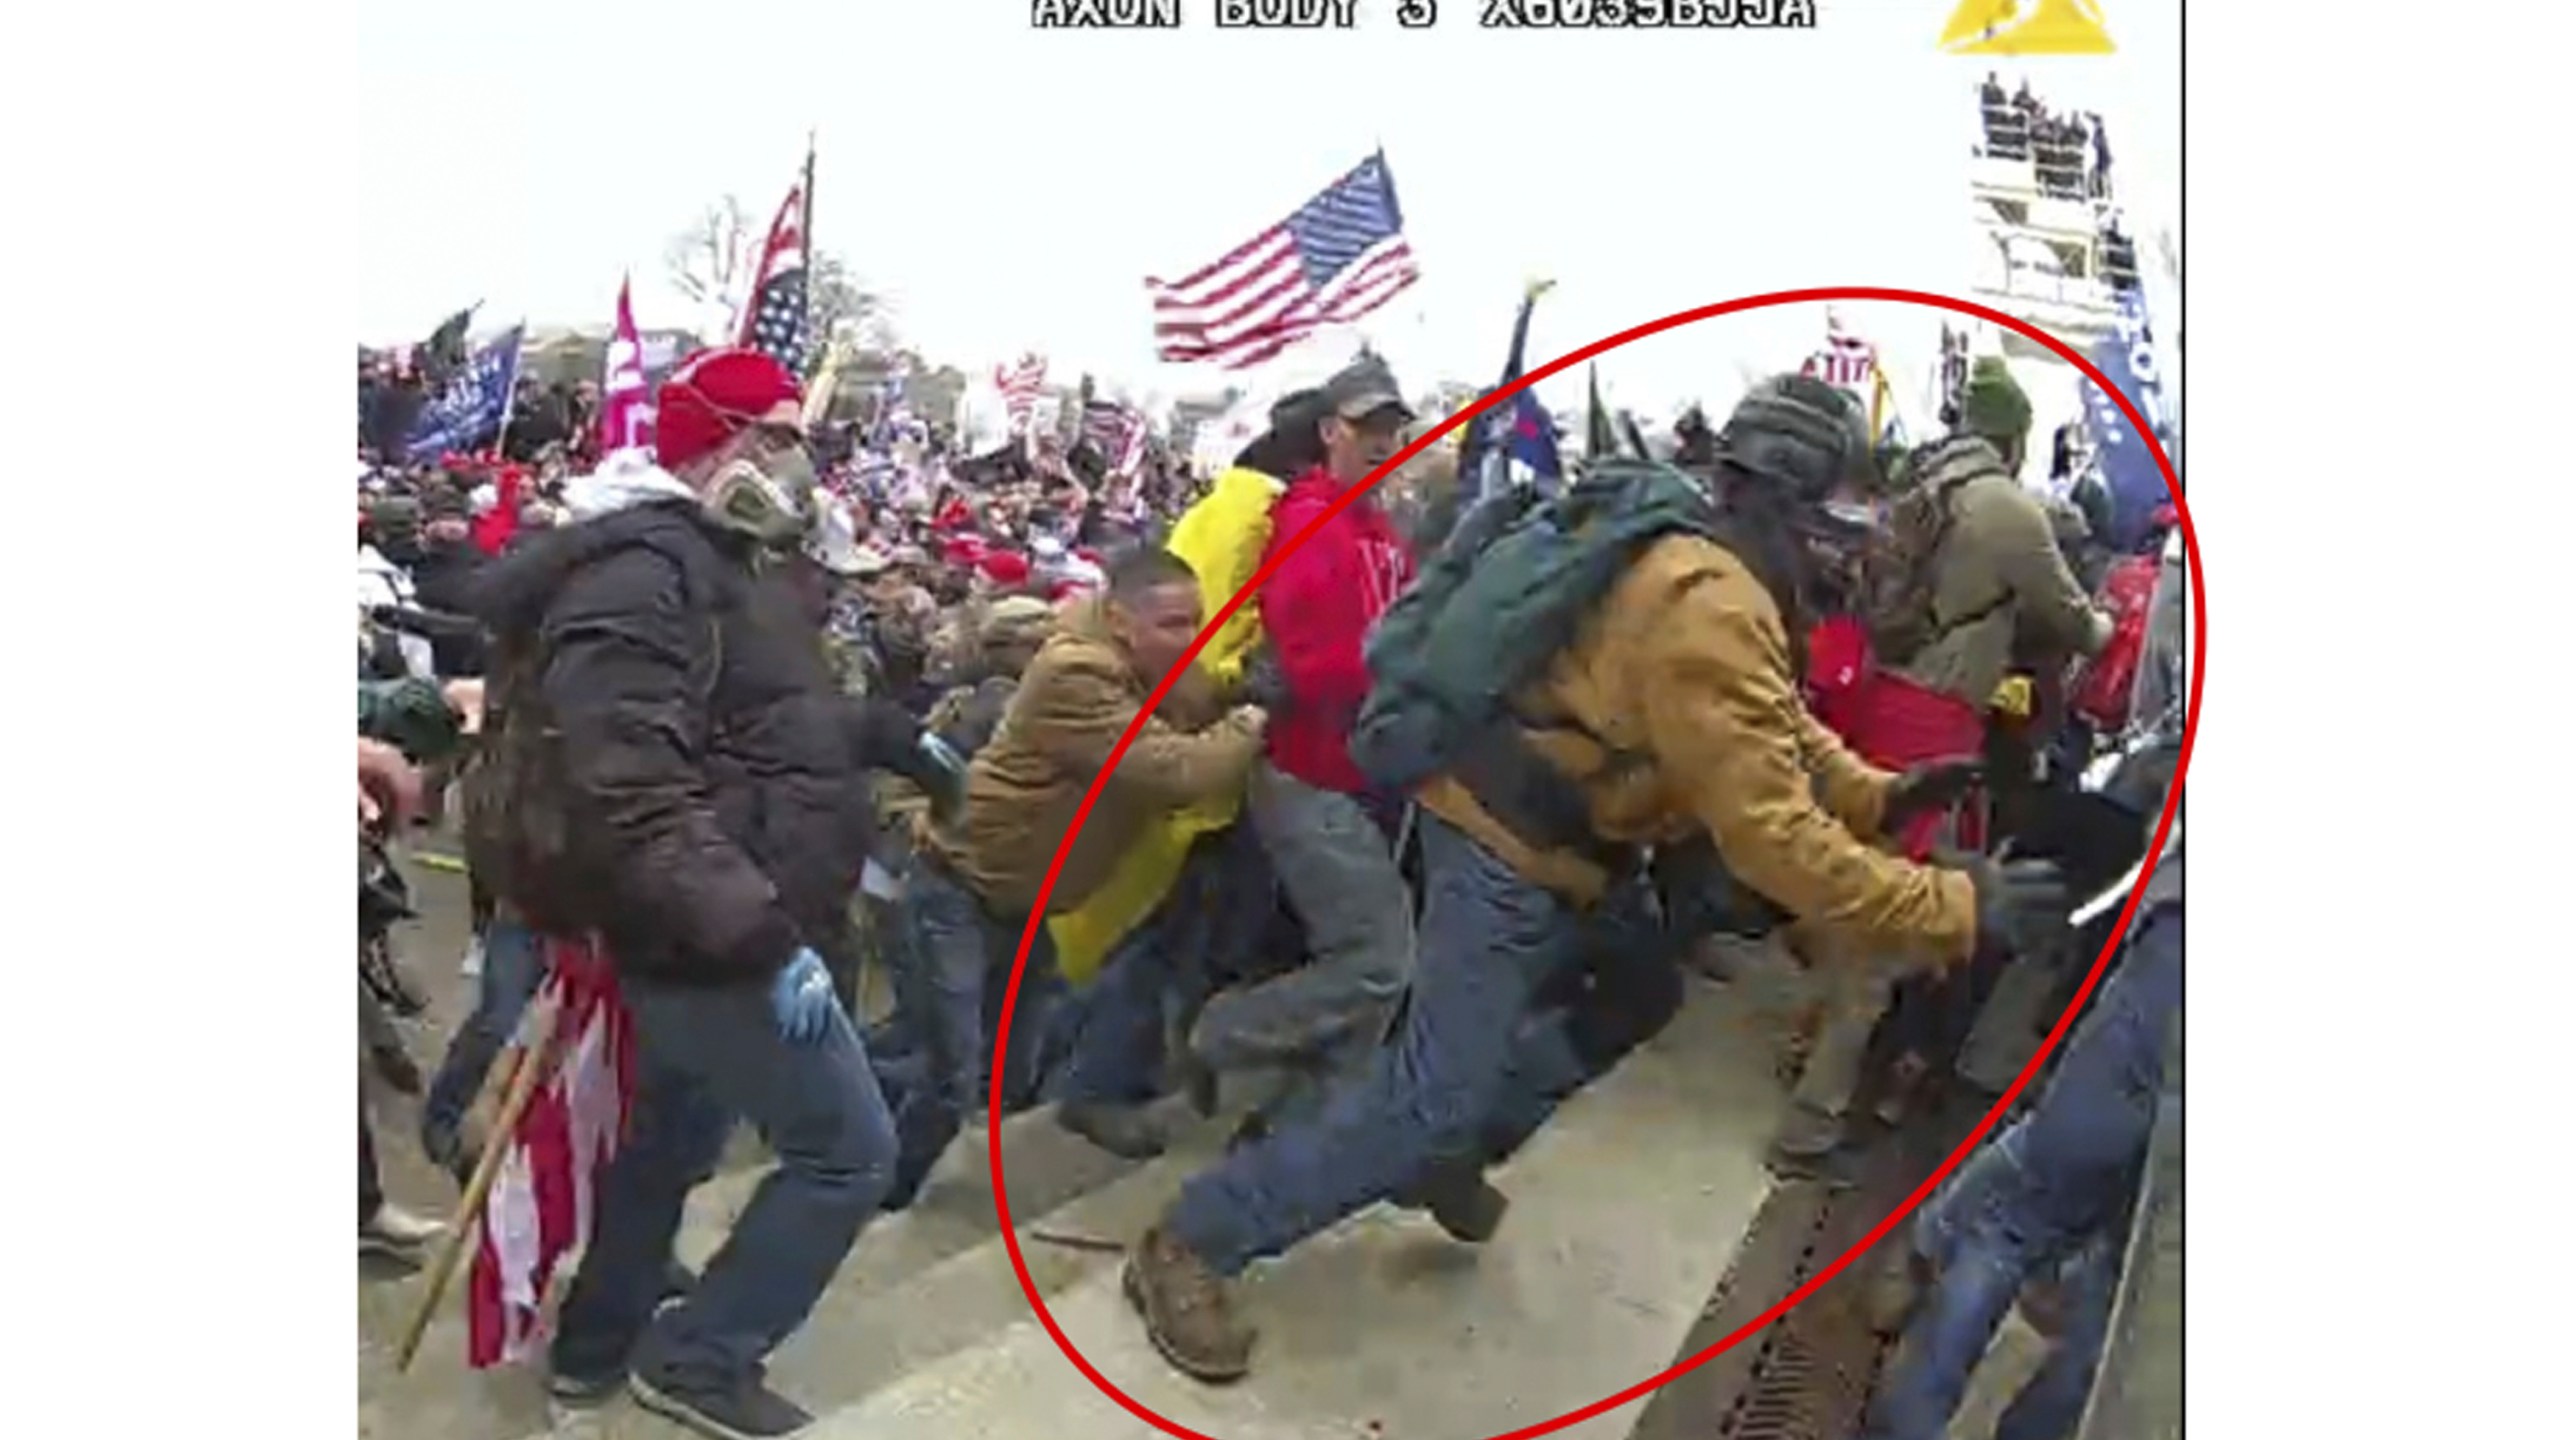 This image from police body-worn camera video, contained and annotated in the Justice Department's government's sentencing memorandum supporting the sentencing of Jeffrey Sabol shows Sabol at the U.S. Capitol on Jan. 6, 2021, in Washington. During the course of an attack on police officers, Sabol ripped the baton out of the hands of a fallen officer, leaving him unable to defend himself against assaults by other rioters. Sabol then helped his co-defendants drag a second officer into the crowd, where that officer was also beaten by rioters. (Department of Justice via AP)